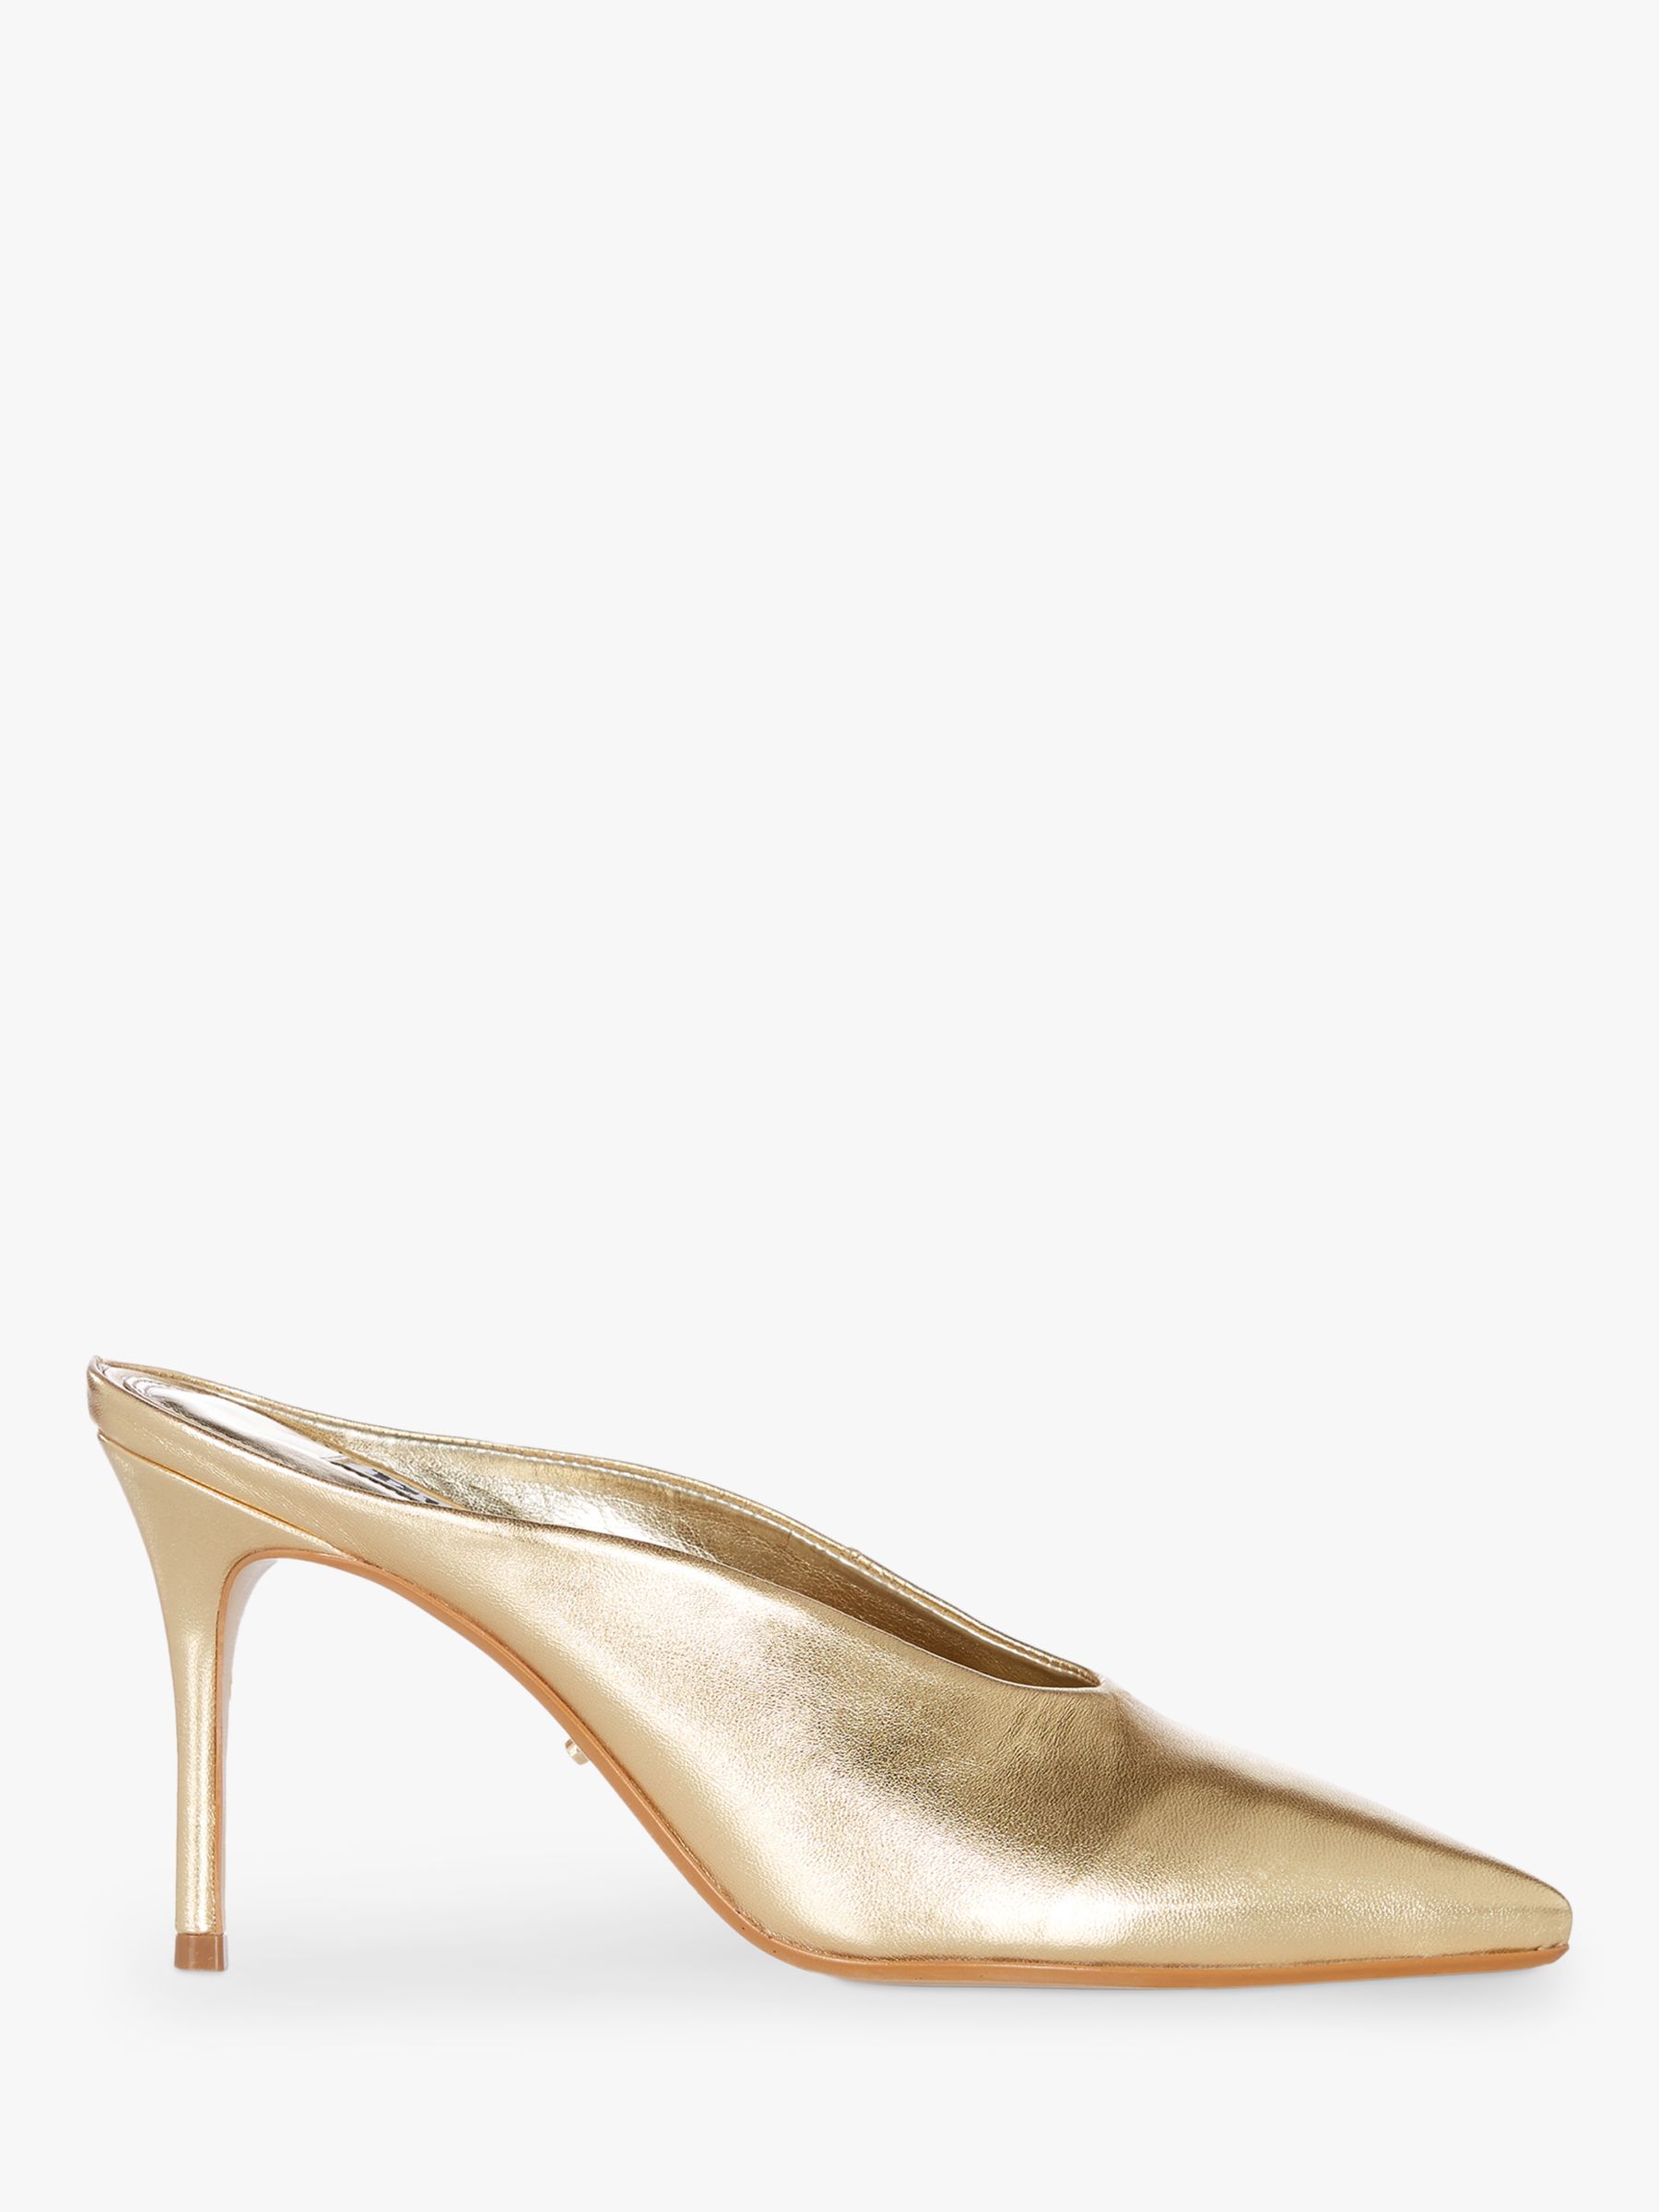 Dune Daelyn Pointed High Heel Open Back Court Shoes, Gold Leather